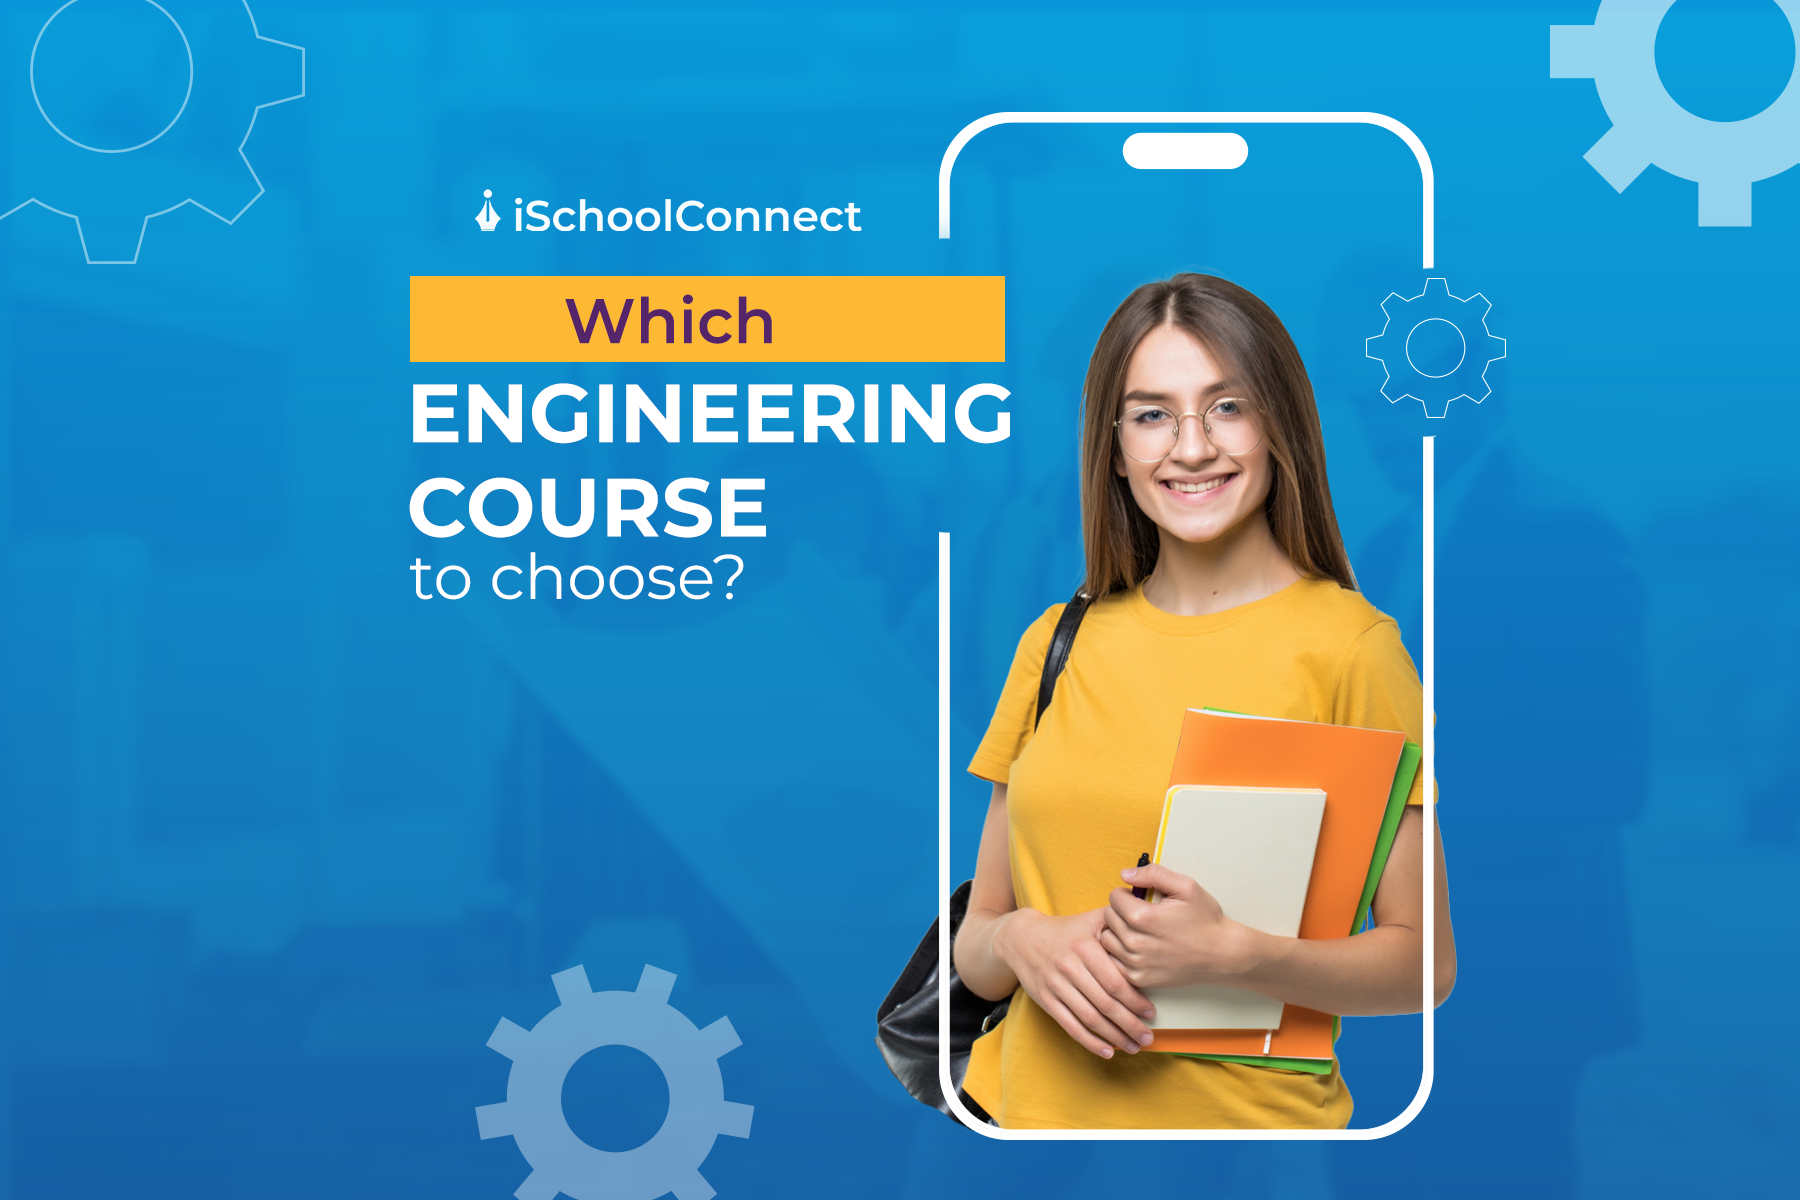 Which Engineering course to choose